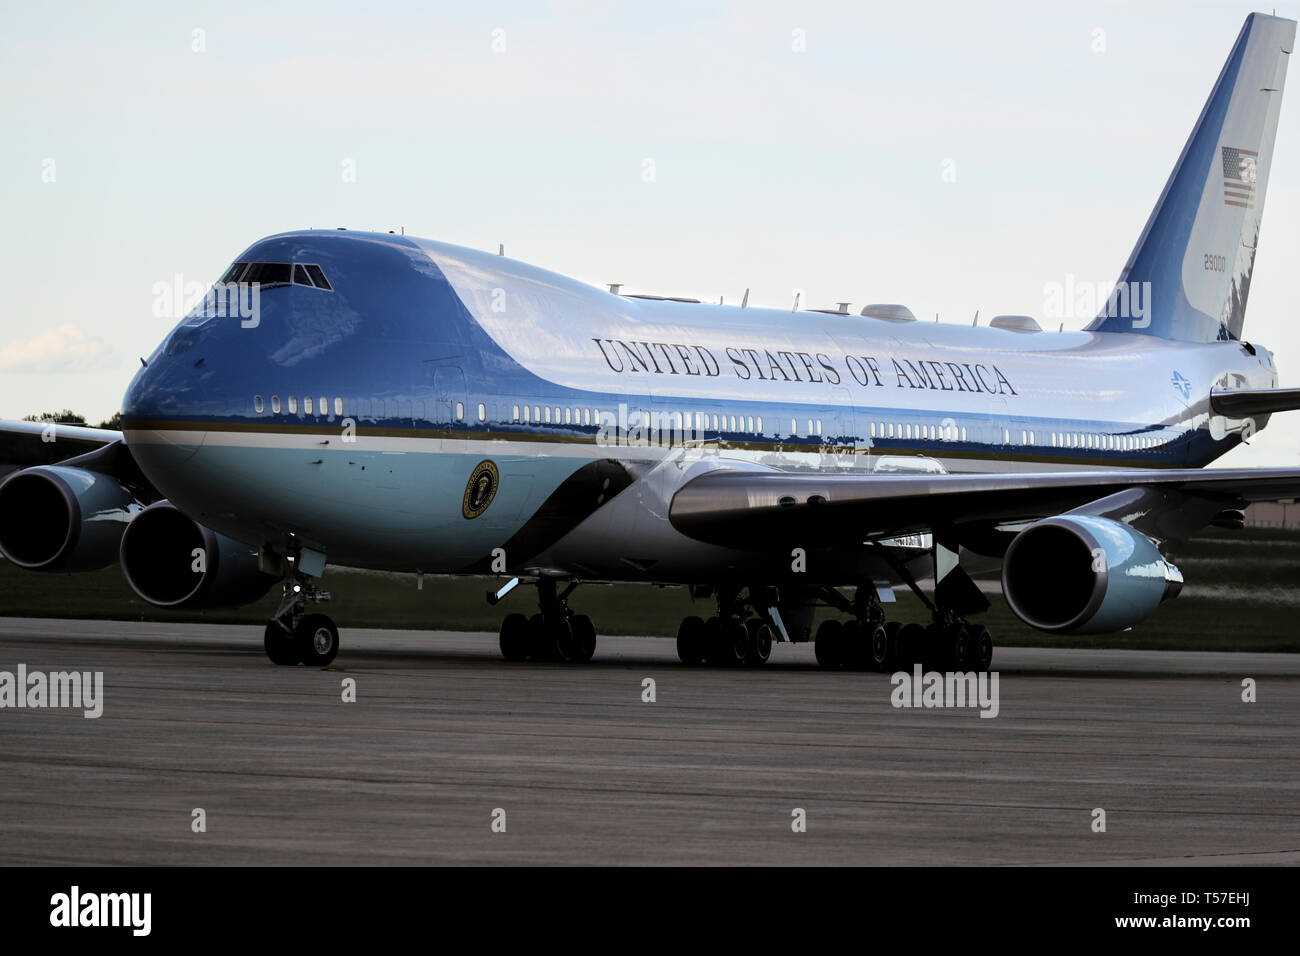 Air Force One, with United States President Donald J. Trump aboard, lands at Joint Base Andrews, Maryland as he returns from Mar-a Lago in Palm Beach, Florida on April 21, 2019. Credit: Oliver Contreras/Pool via CNP /MediaPunch Stock Photo